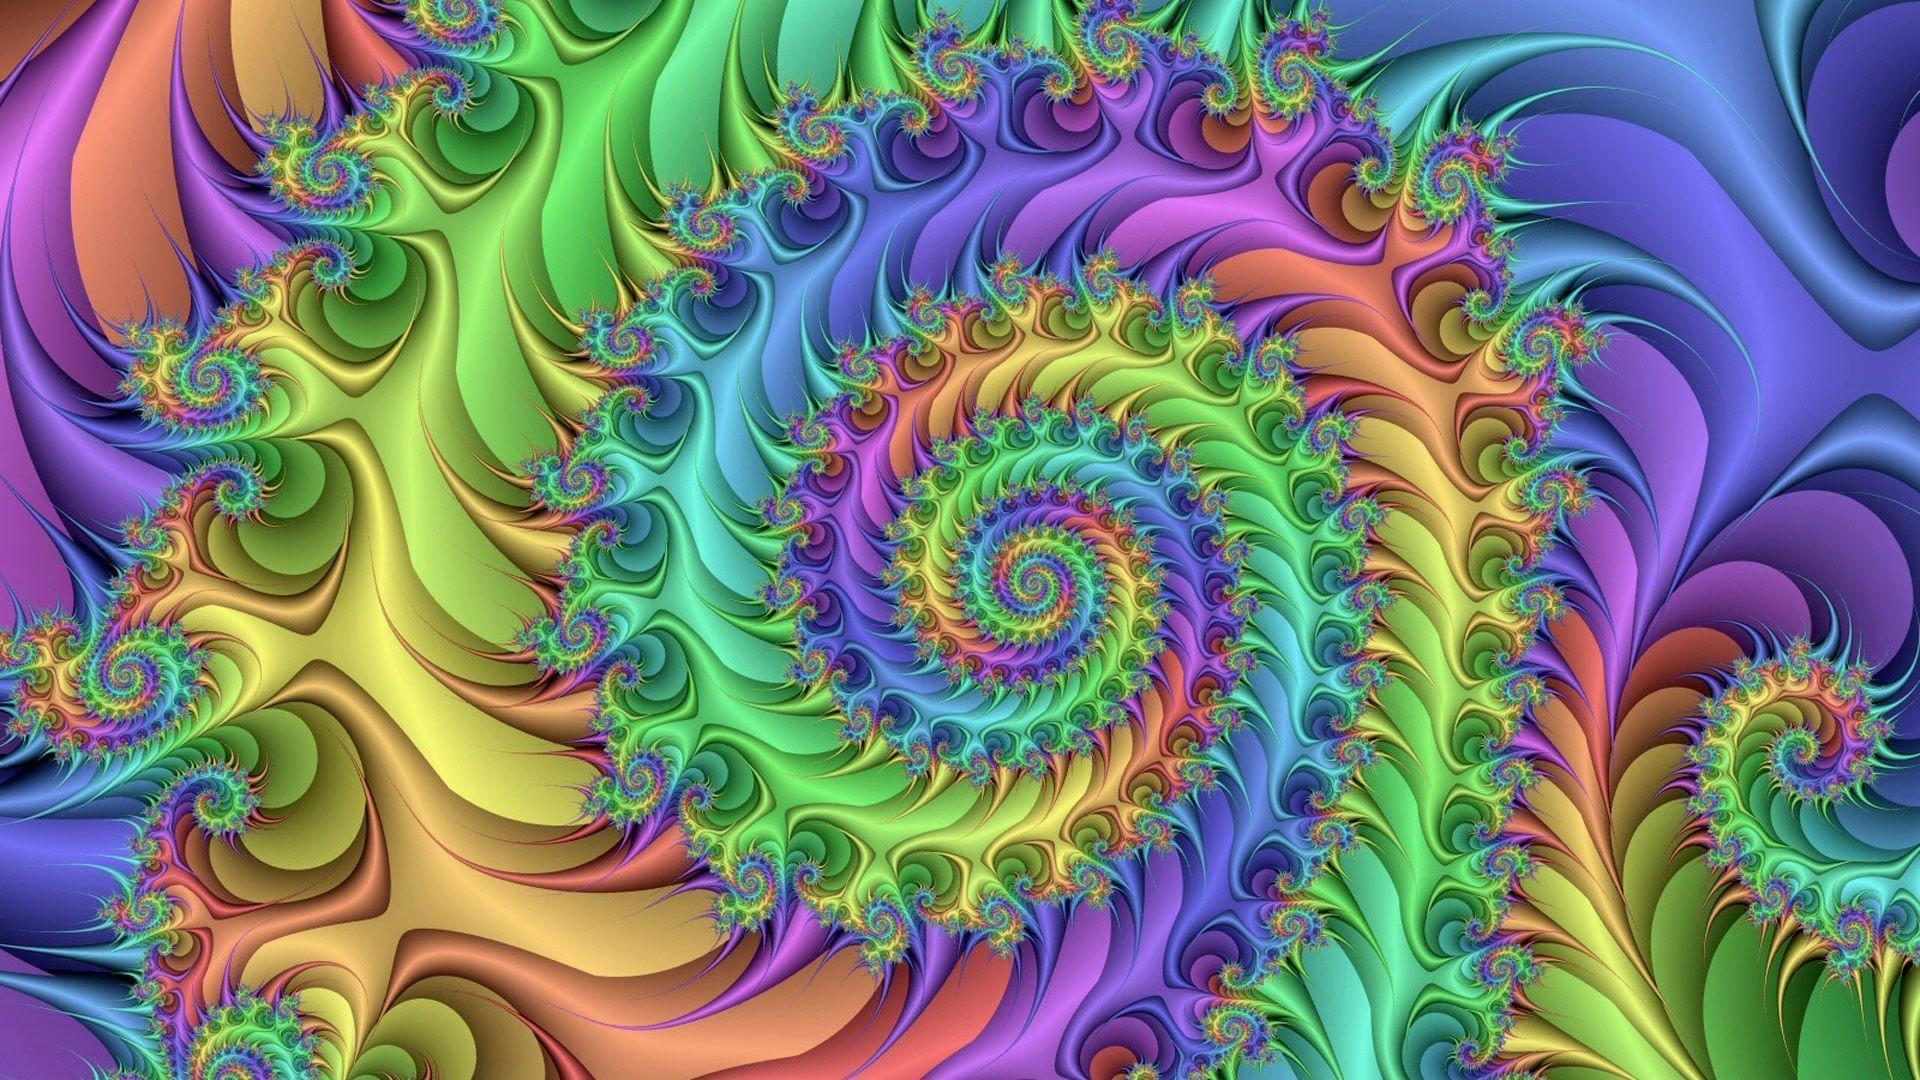 1920x1080 Wallpapers For > Trippy Shrooms Wallpapers Hd